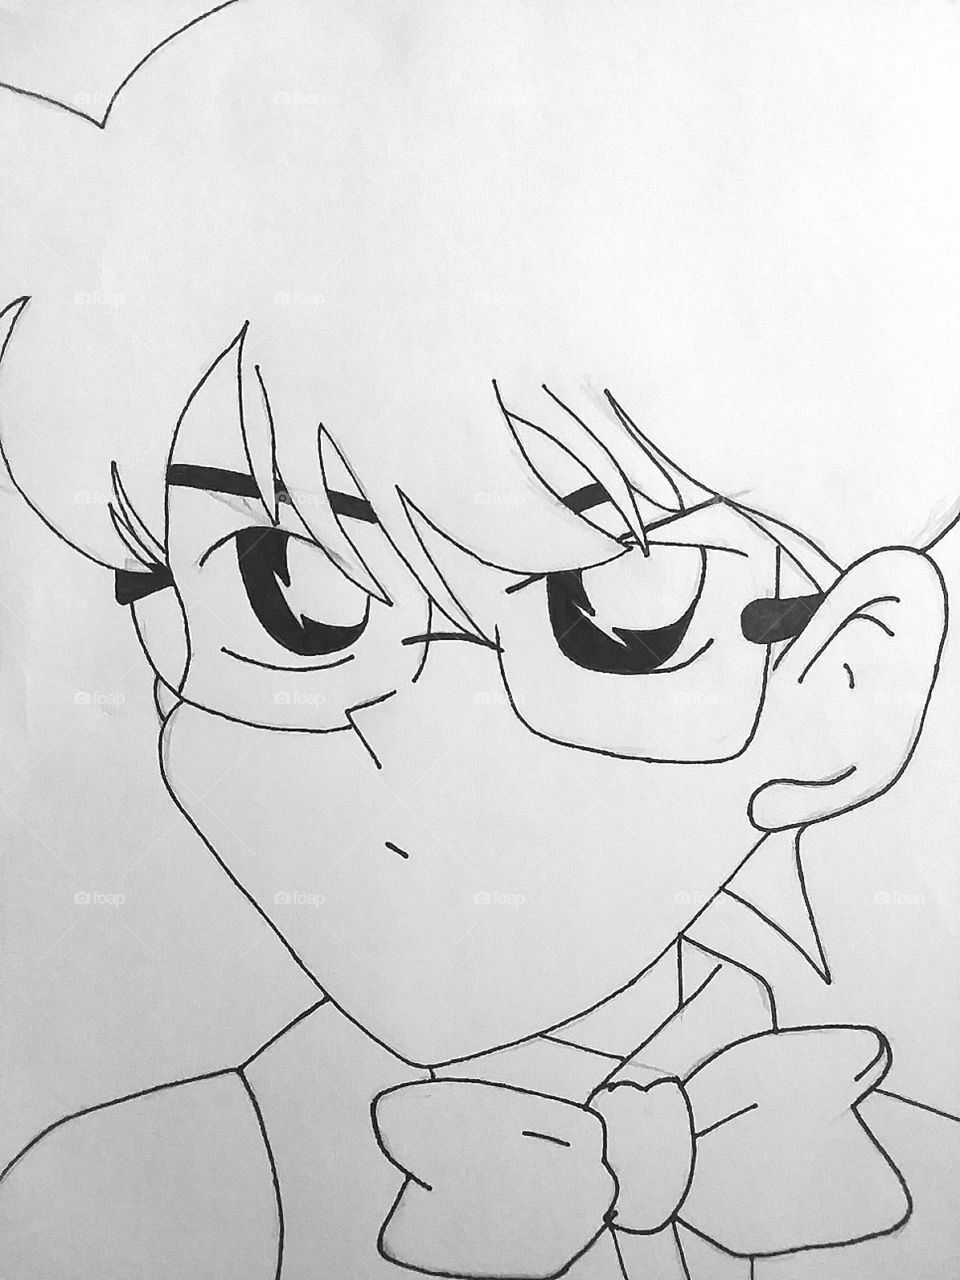 dramatic handrawn anime image of a young man wearing glasses having a dramatic facial expression in great